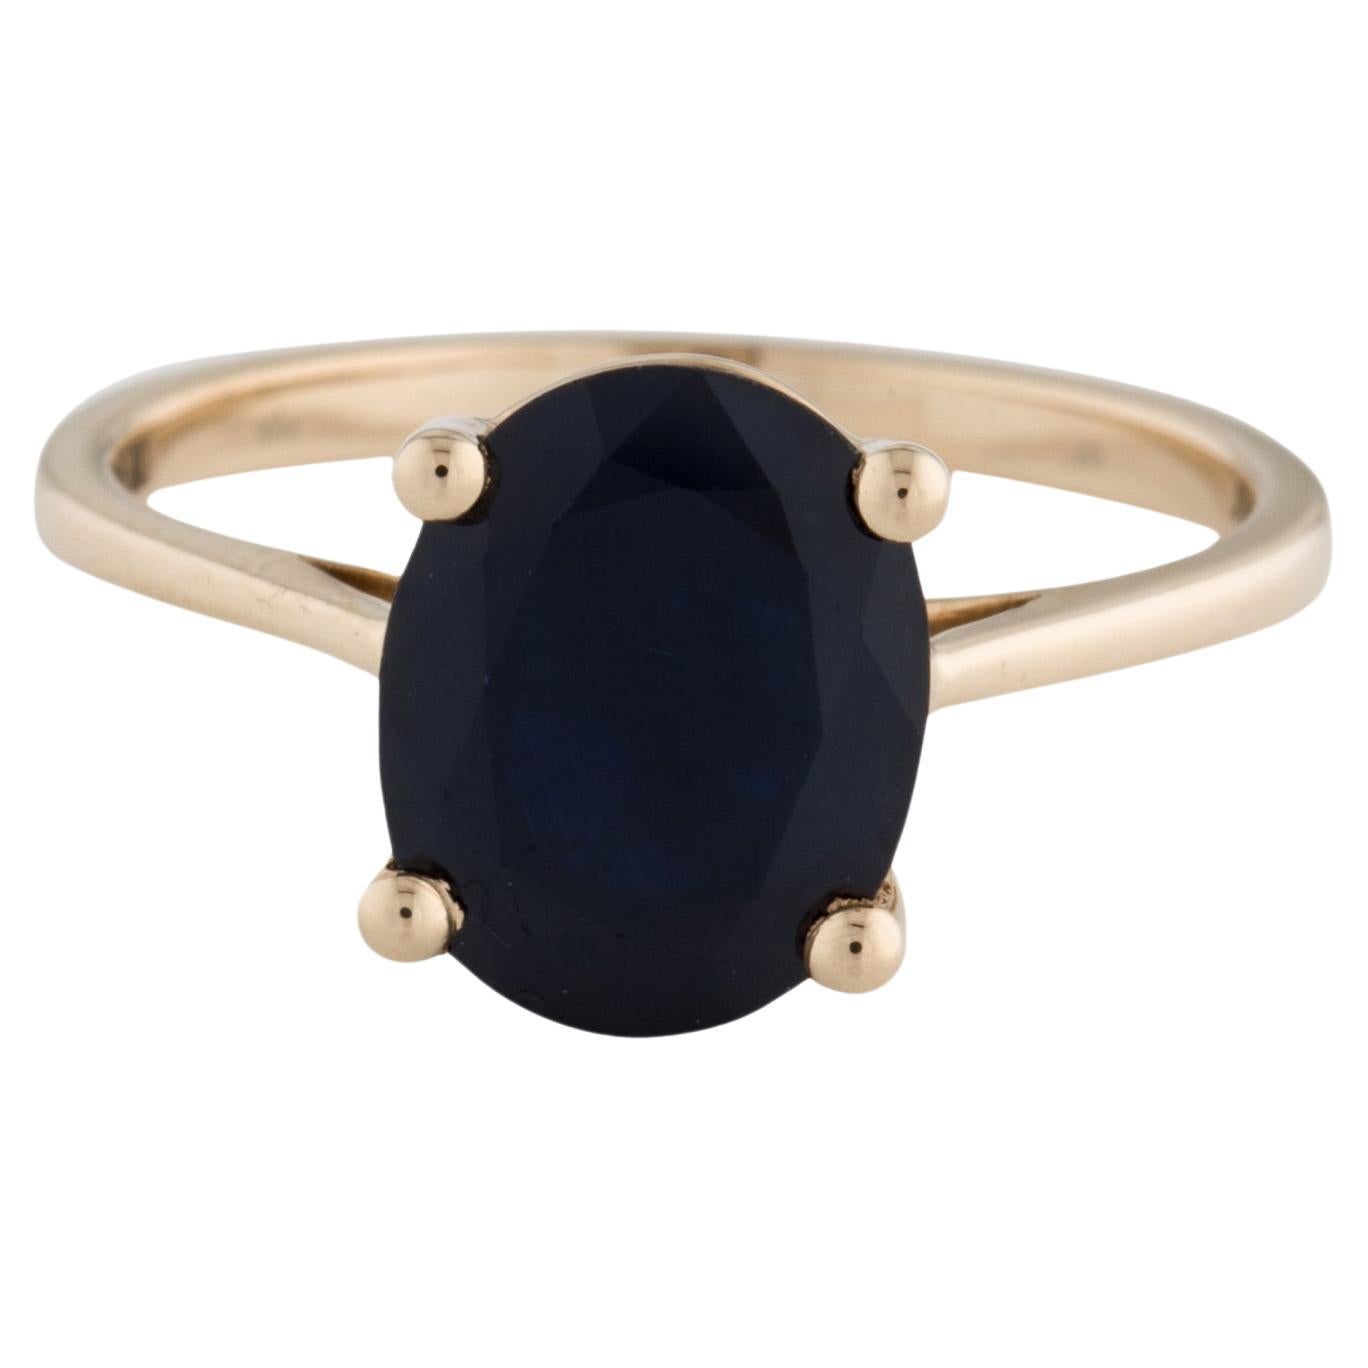 Dazzling 14K Gold 2.99ct Sapphire Cocktail Ring - Size 6.75 - Statement Jewelry